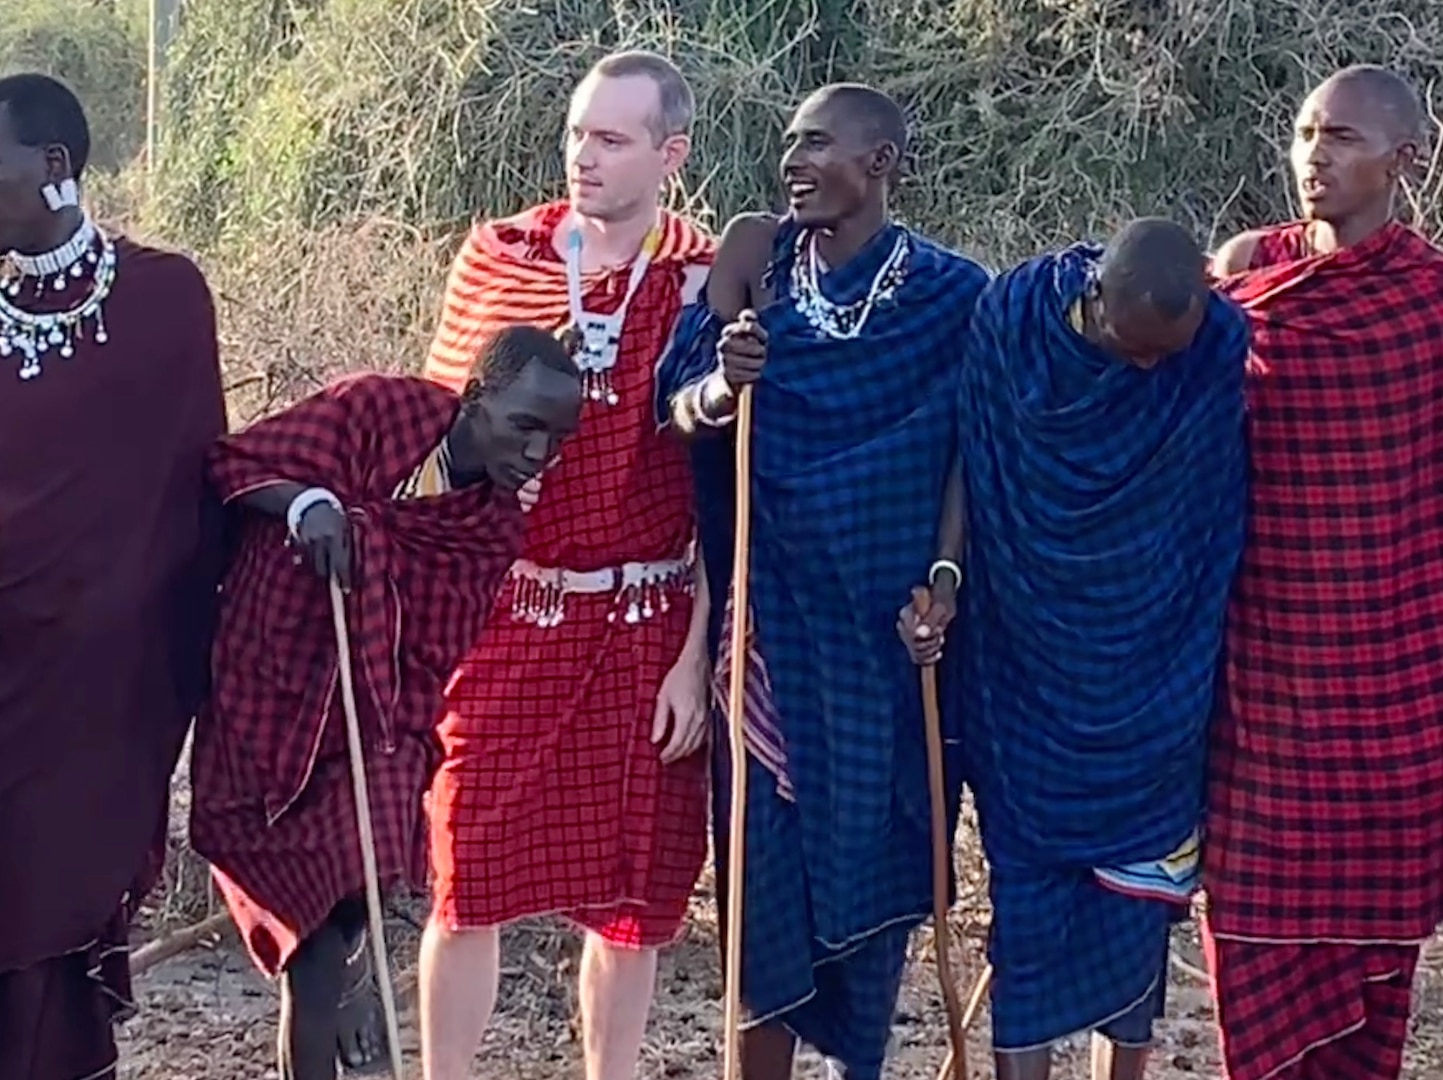 Jeff Crow, material planner in the Defense Logistics Agency Troop Support’s Industrial Hardware supply chain, stands with men from the Maasai tribe during his trip to climb Mount Kilimanjaro in Tanzania December 2018.